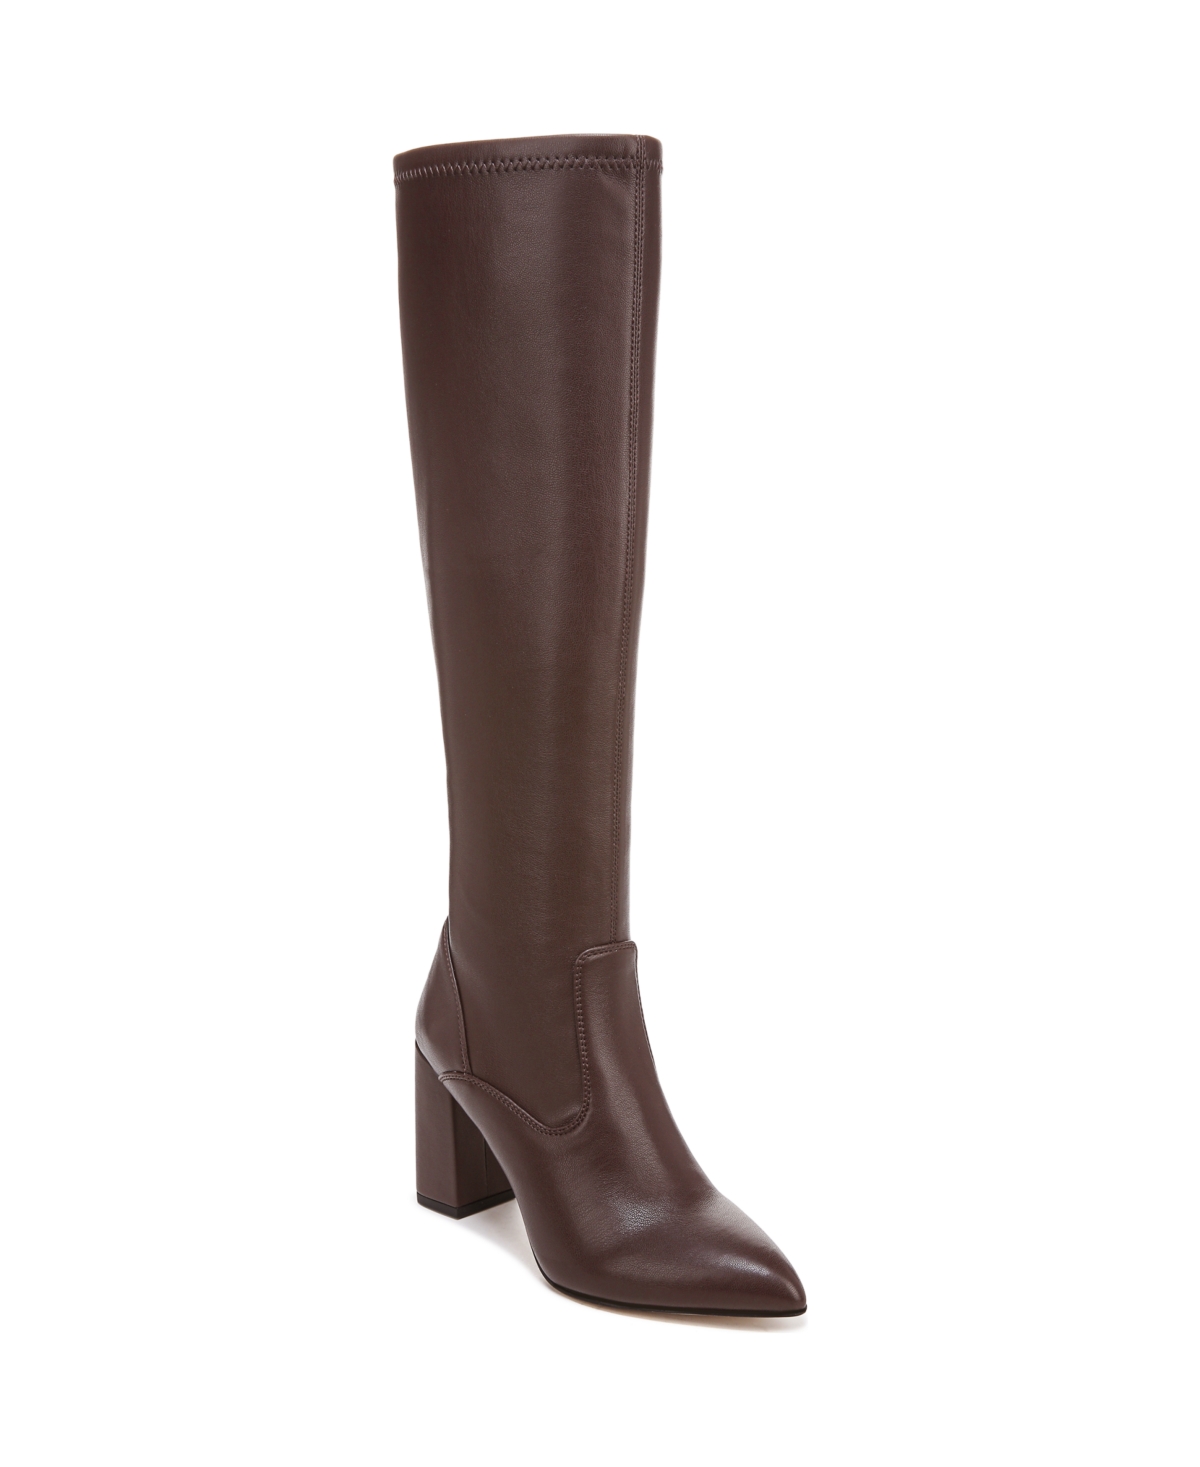 Katherine Knee High Boots - Brown Faux Leather